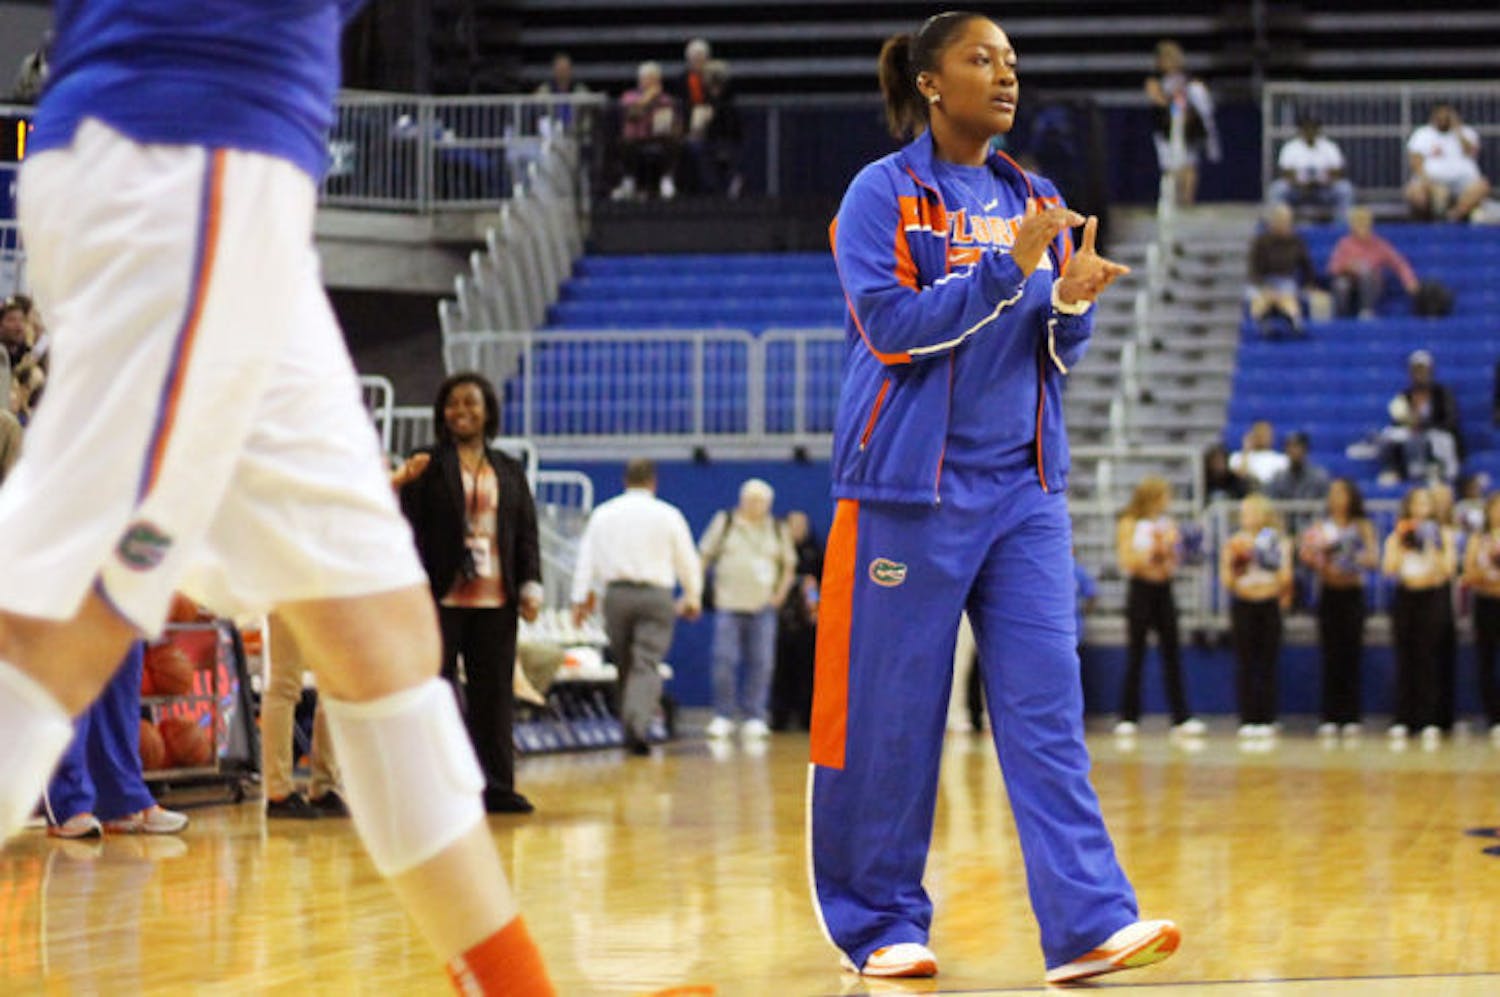 Antoinette Bannister claps during pregame warmups before Florida's 68-57 loss to Vanderbilt on Feb. 21 in the O'Connell Center. Bannister decided to leave North Carolina and transfer to UF in order to be closer to her mother, who has battled serious illness since October 2012. Bannister will be eligible to play for the Gators at the conclusion of the Fall 2013 semester.